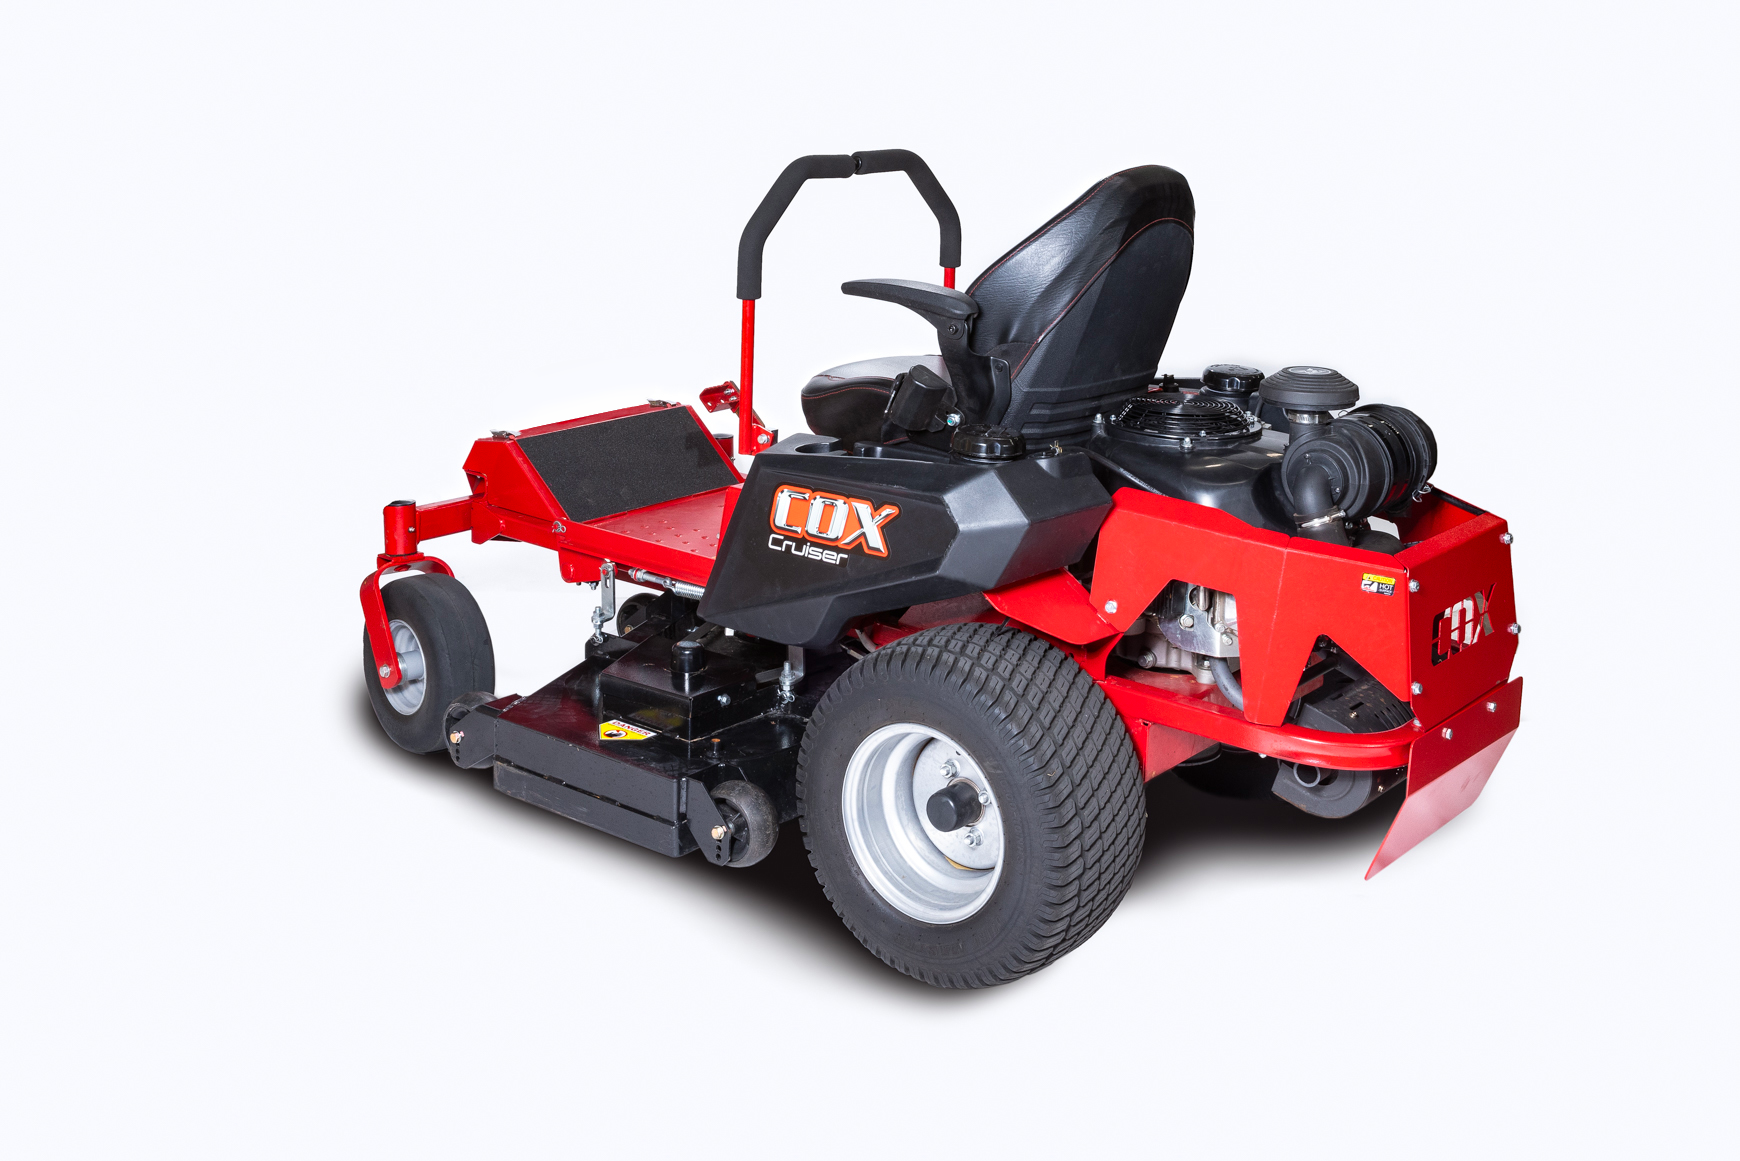 COX Mowers product image of a COX Cruiser Zero Turn Ride On Mower from the back of the mower